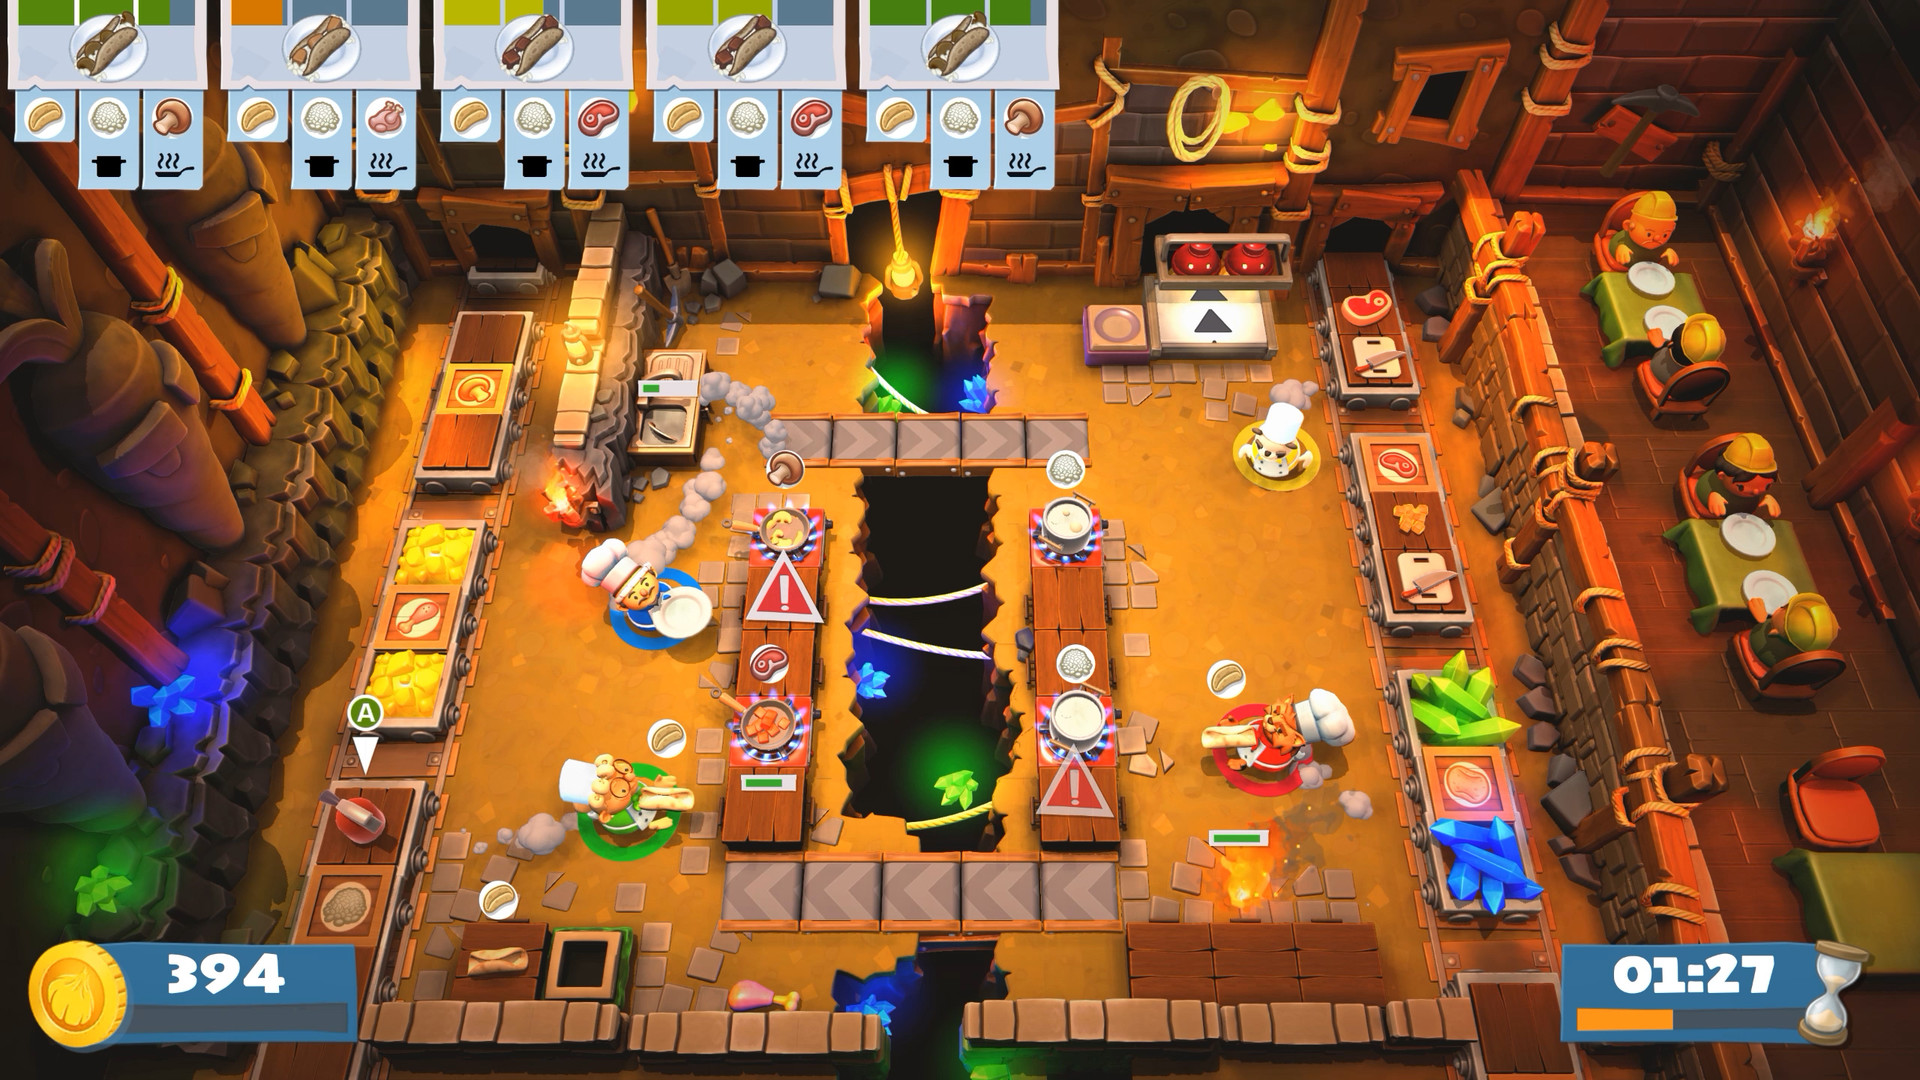 overcooked 2 switch 4 player local